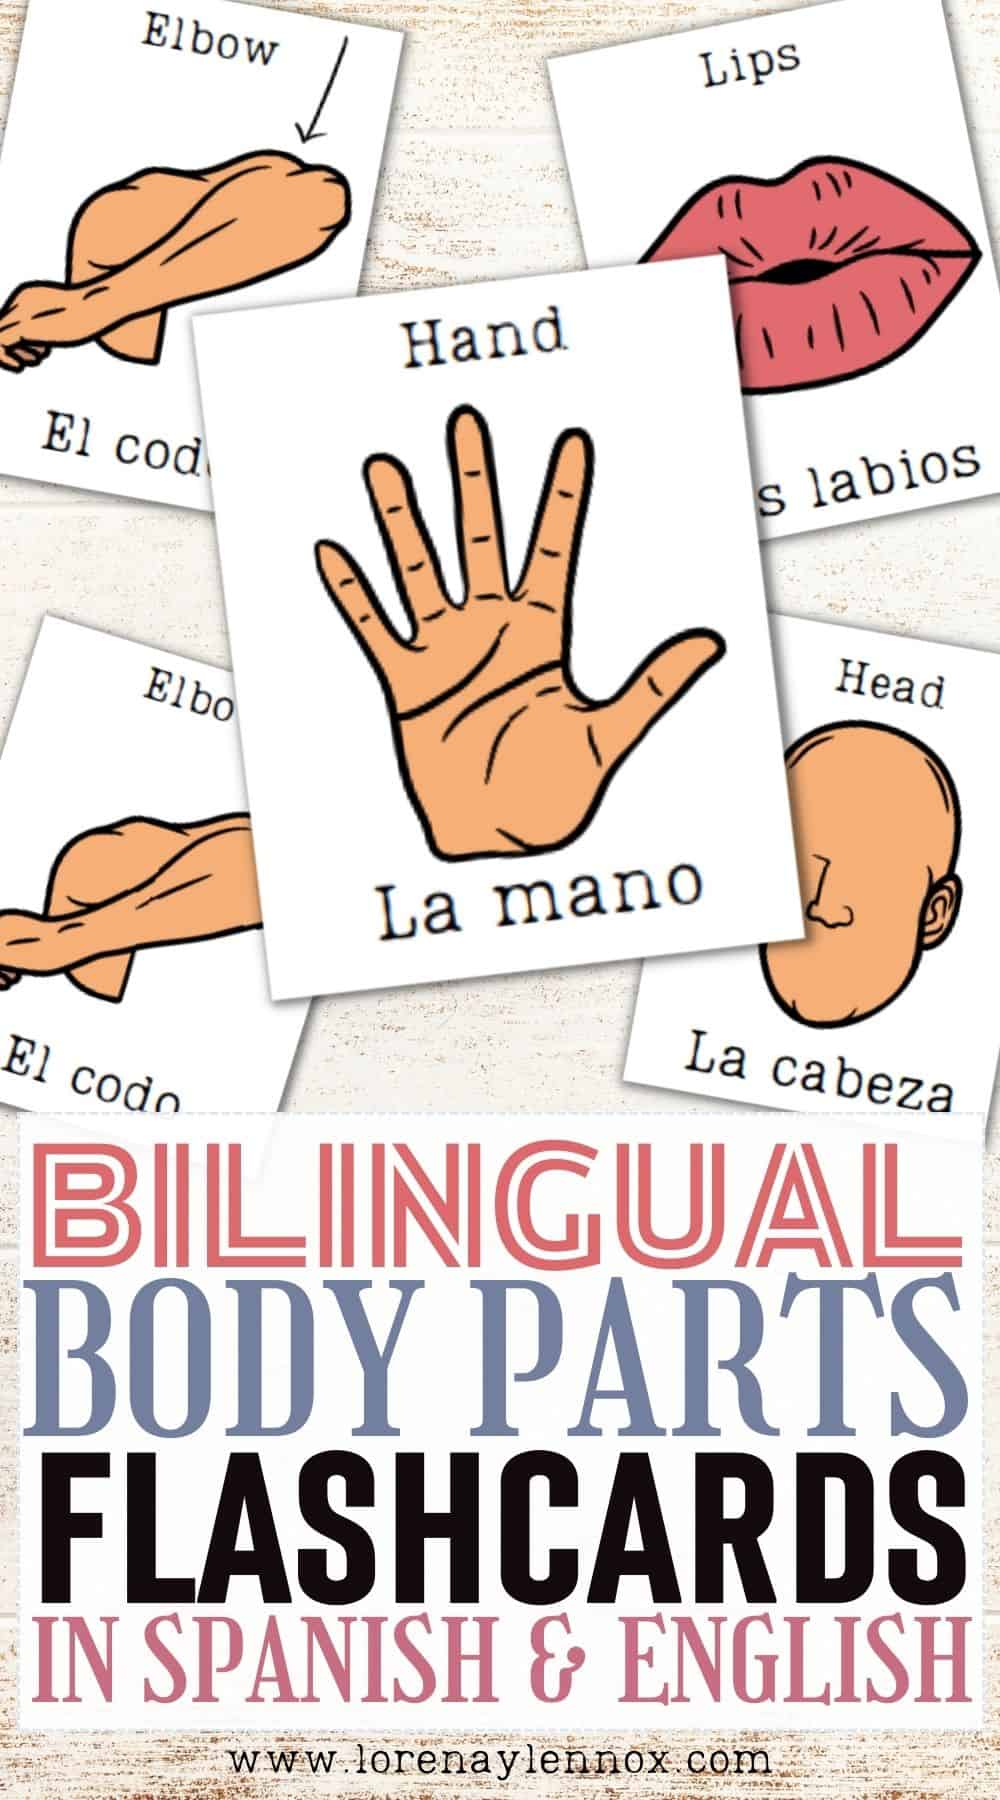 Bilingual Body Parts Flashcards Printable in Spanish and English